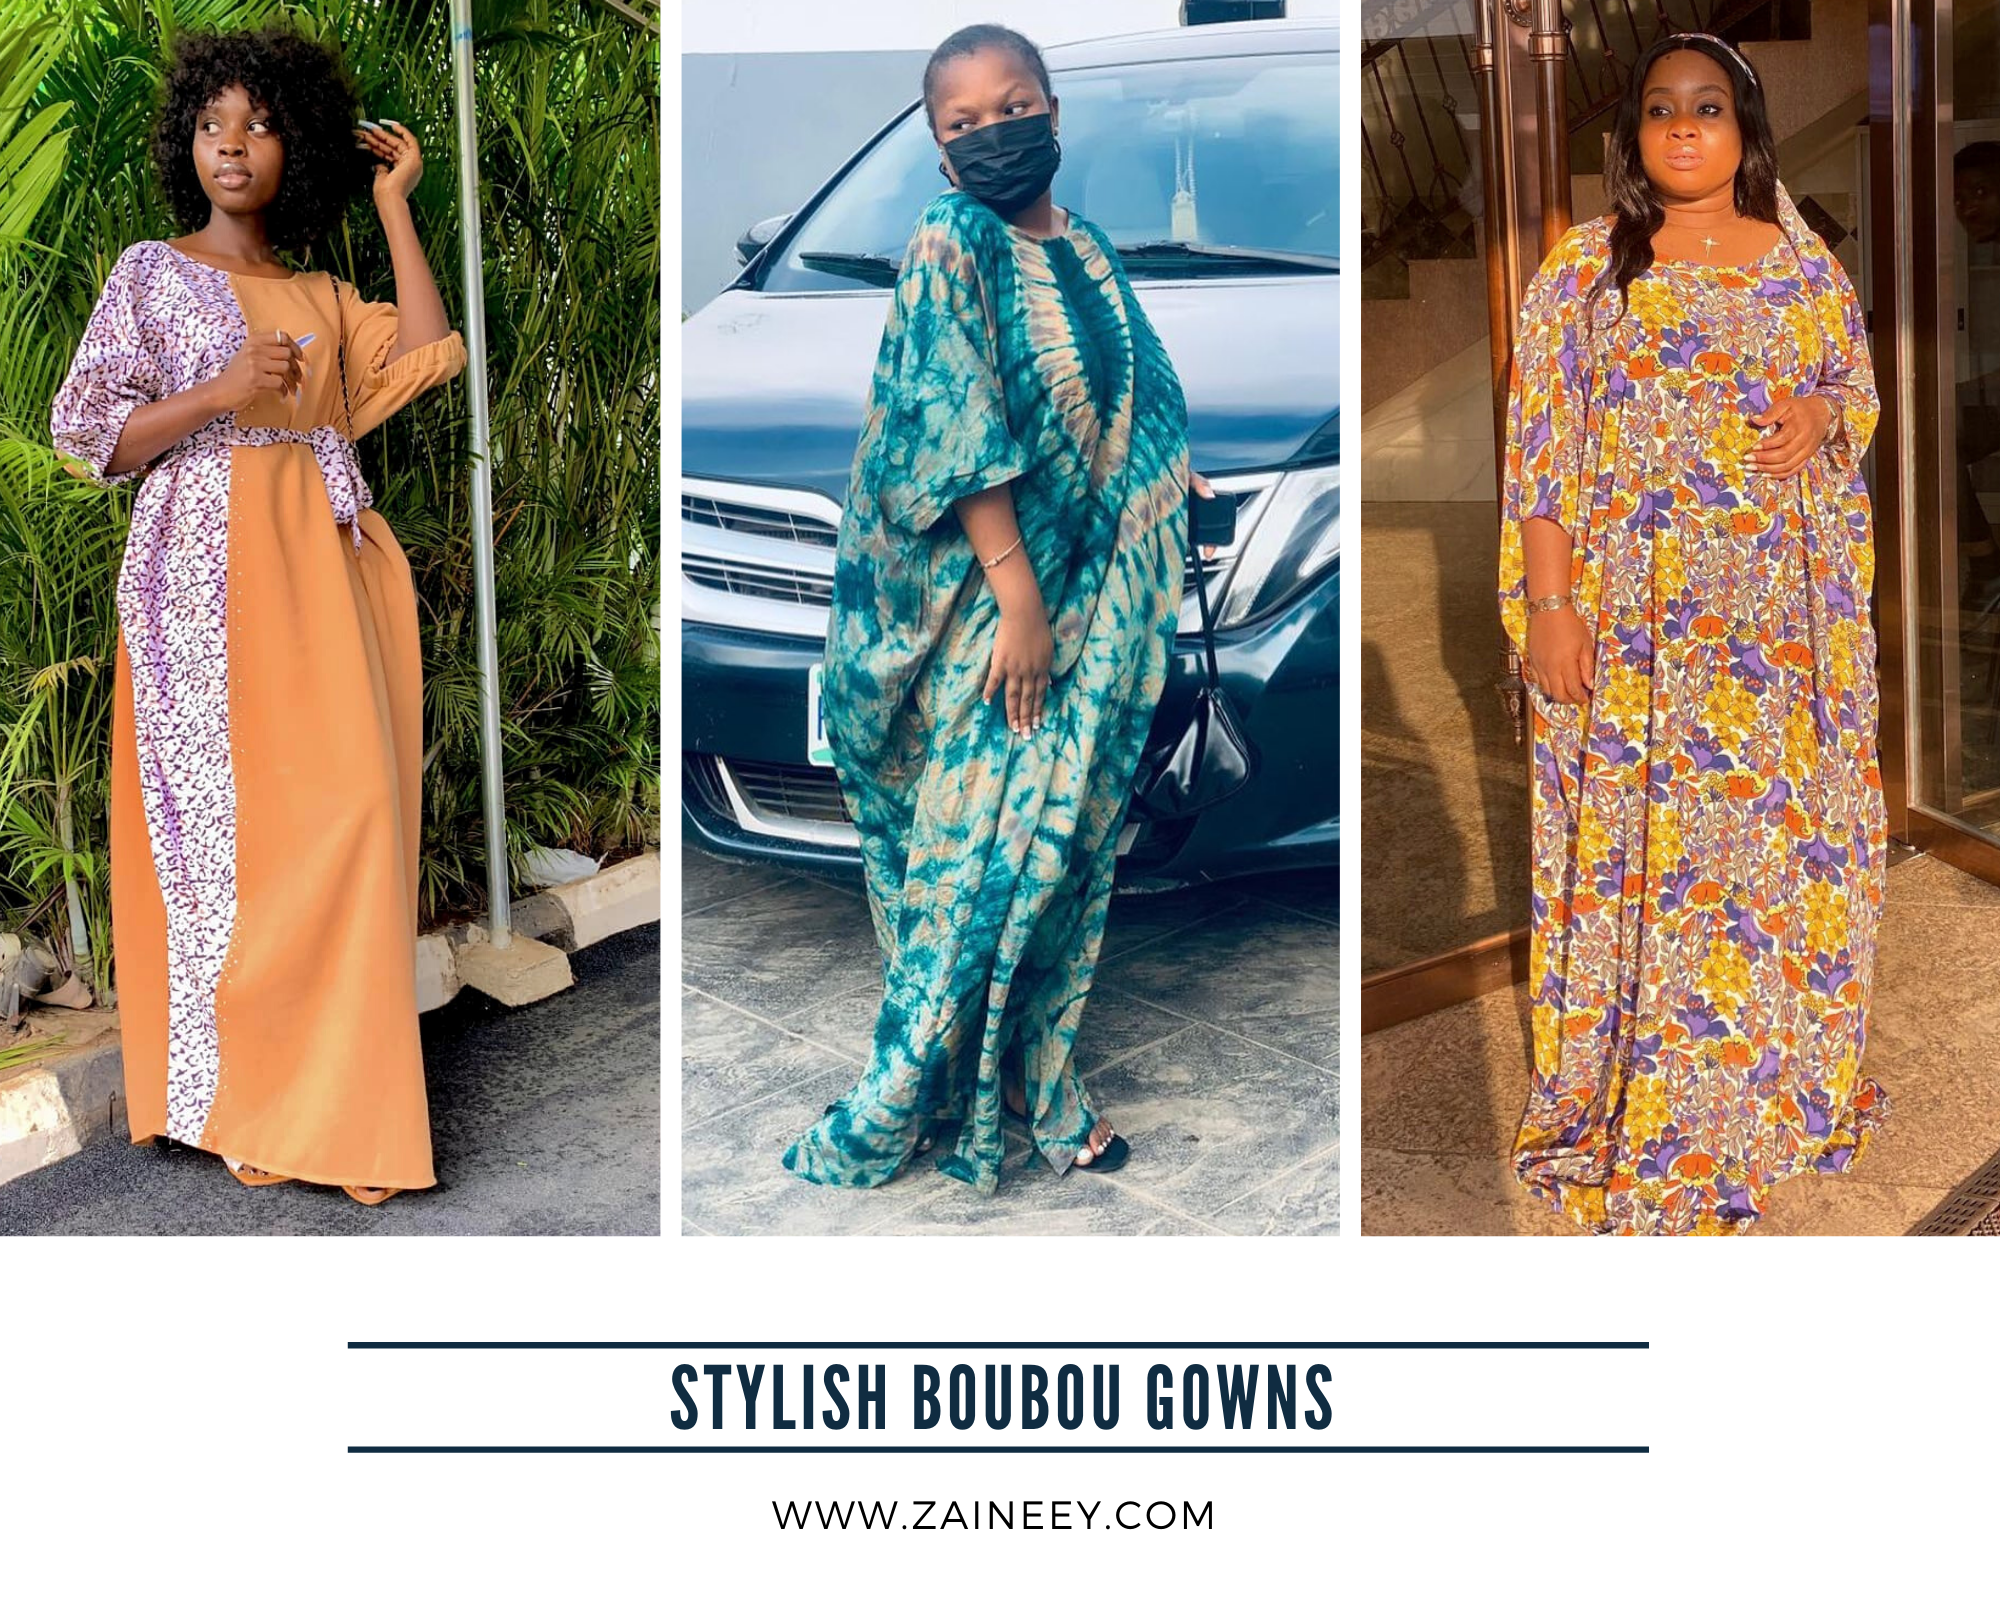 Stunning and Stylish Boubou Gowns for Chic and Classy Looks